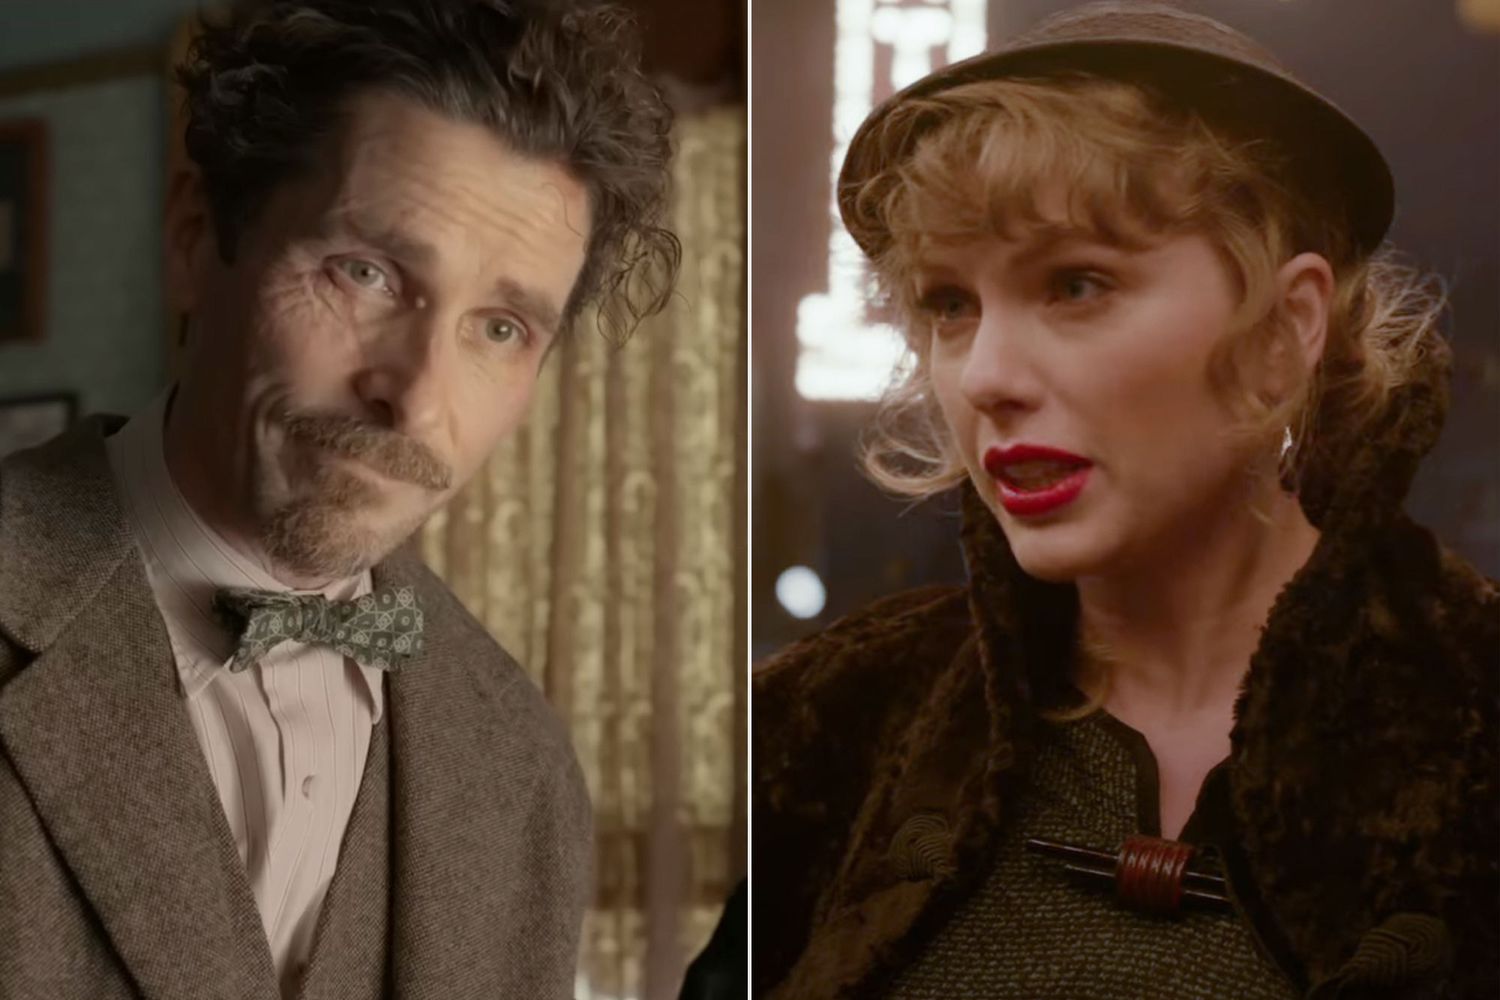 Christian Bale was told to stop singing in 'Amsterdam' because he was drowning out Taylor Swift